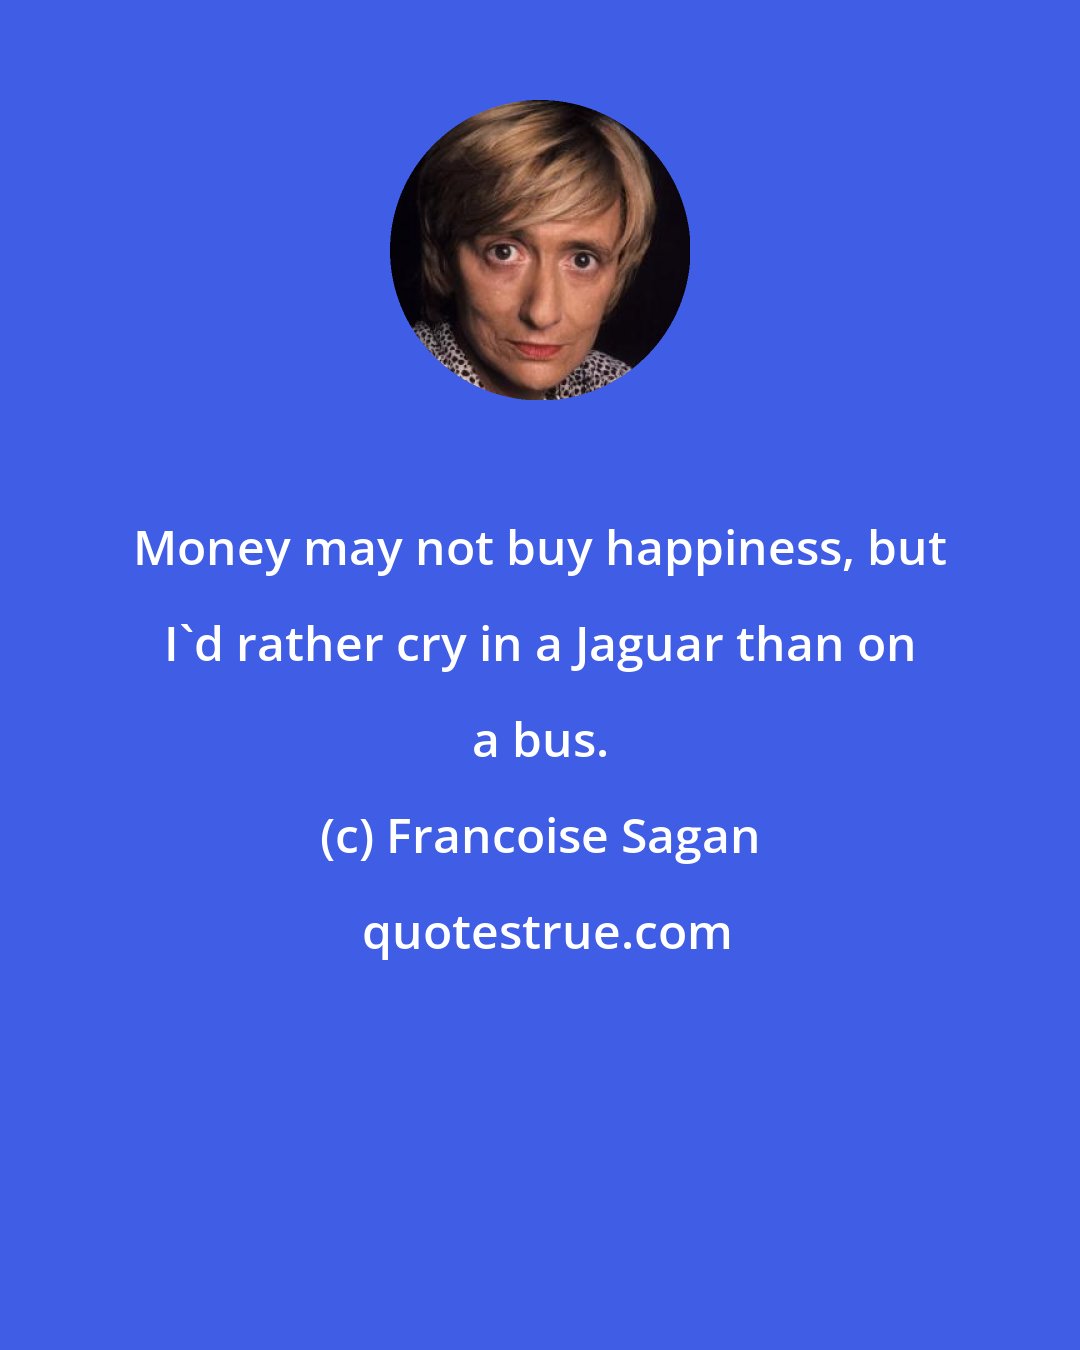 Francoise Sagan: Money may not buy happiness, but I'd rather cry in a Jaguar than on a bus.